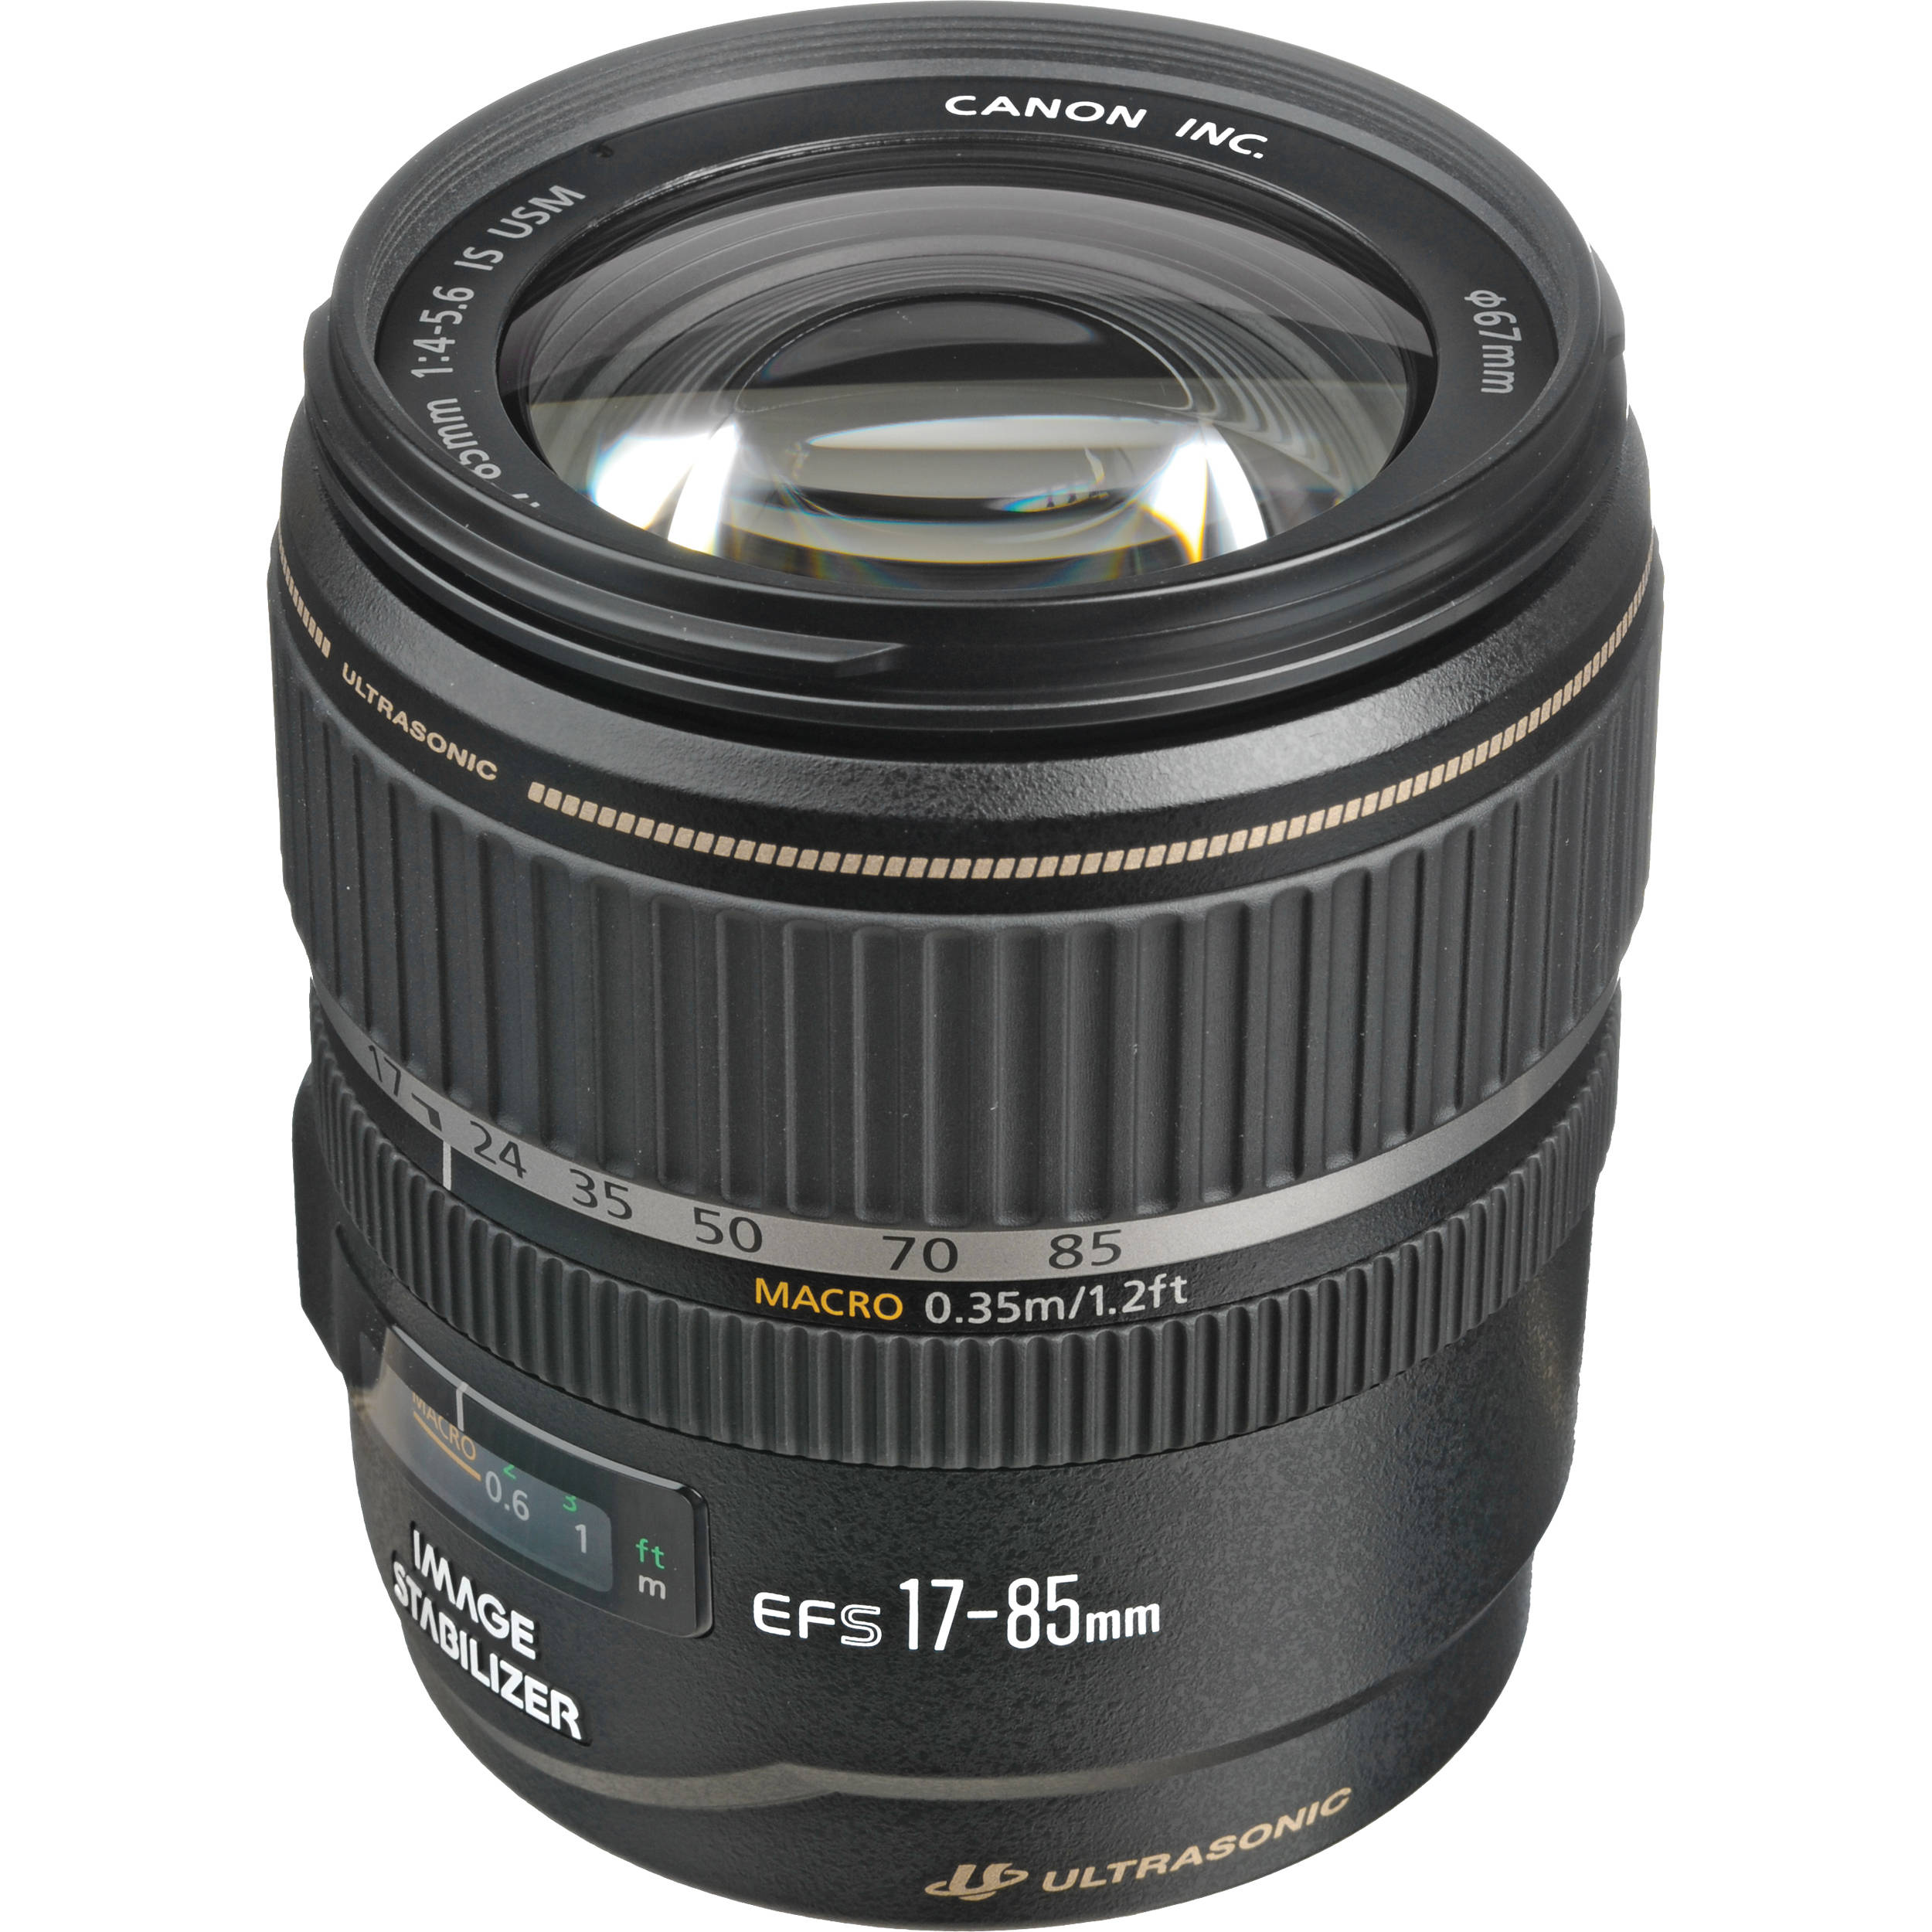 Canon Ef S 17 85mm F 4 5 6 Is Usm Lens 9517a002 B H Photo Video